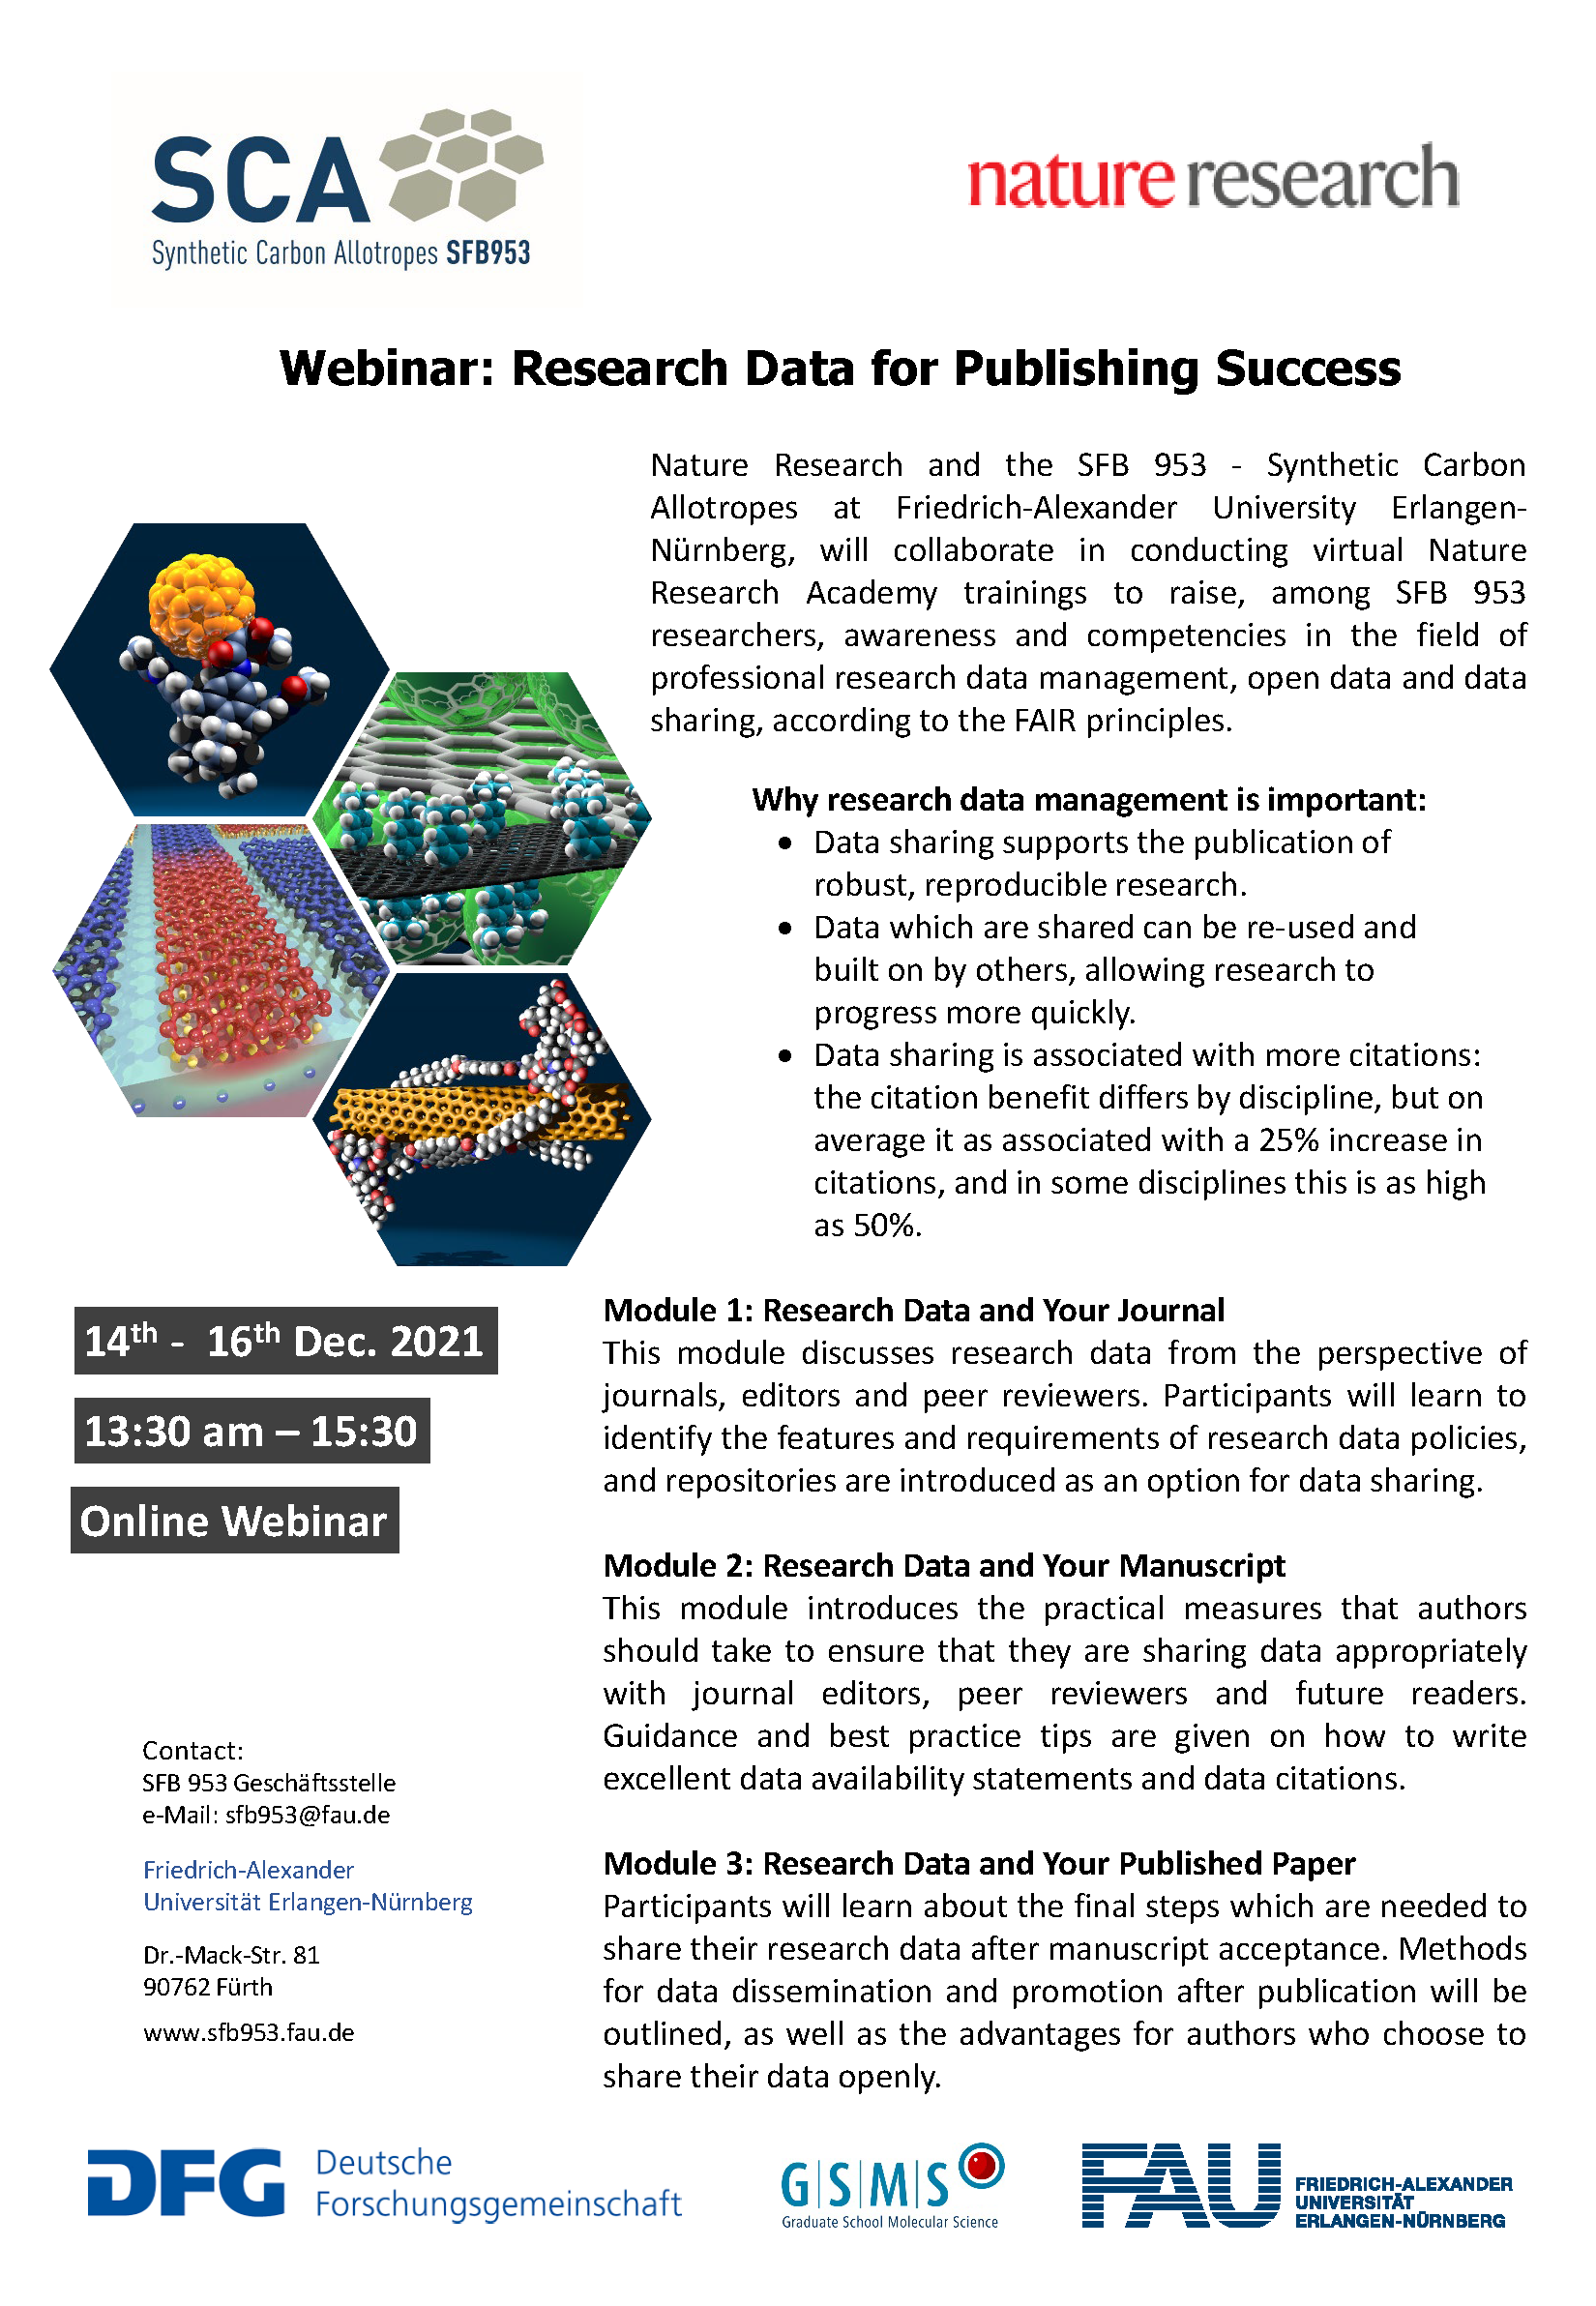 Poster "Webinar: Research Data for Publishing Success"